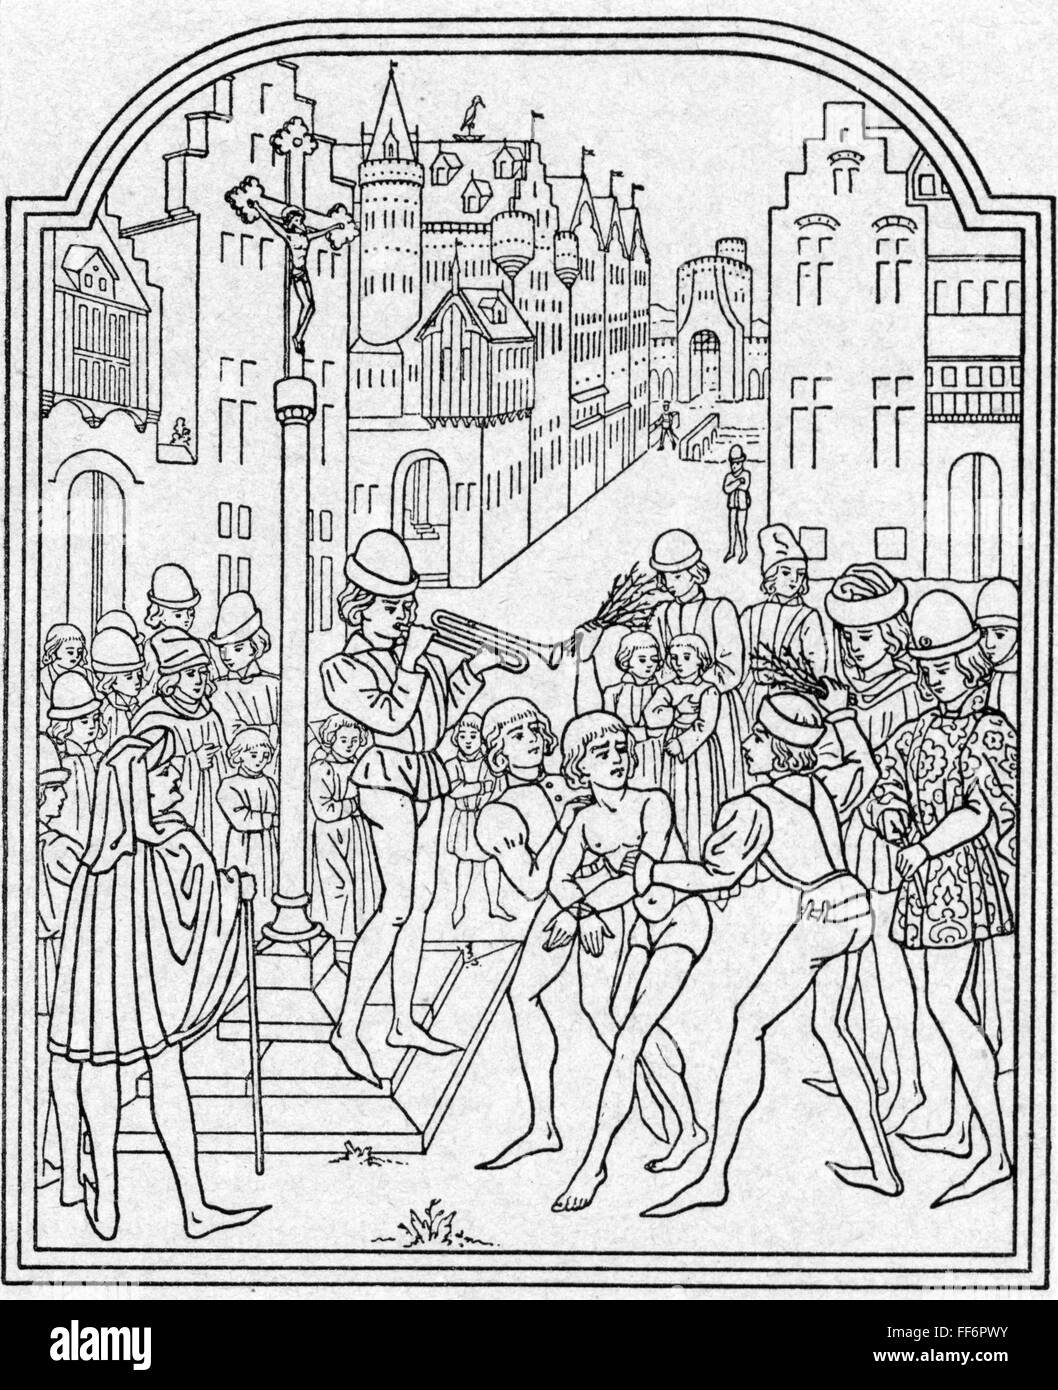 justice, penitentiary system, flogging, public flaggelation, after pen drawing, wood engraving, 19th century, 19th century, Middle Ages, medieval, mediaeval, graphic, graphics, jurisdiction, penalty, penalties, punishments, corporal punishment, marketplace, market-place, flogging, flog, whipping, whip, whips, viewer, viewers, audience, audiences, public flaggelation, historic, historical, people, crowd, crowds, Additional-Rights-Clearences-Not Available Stock Photo